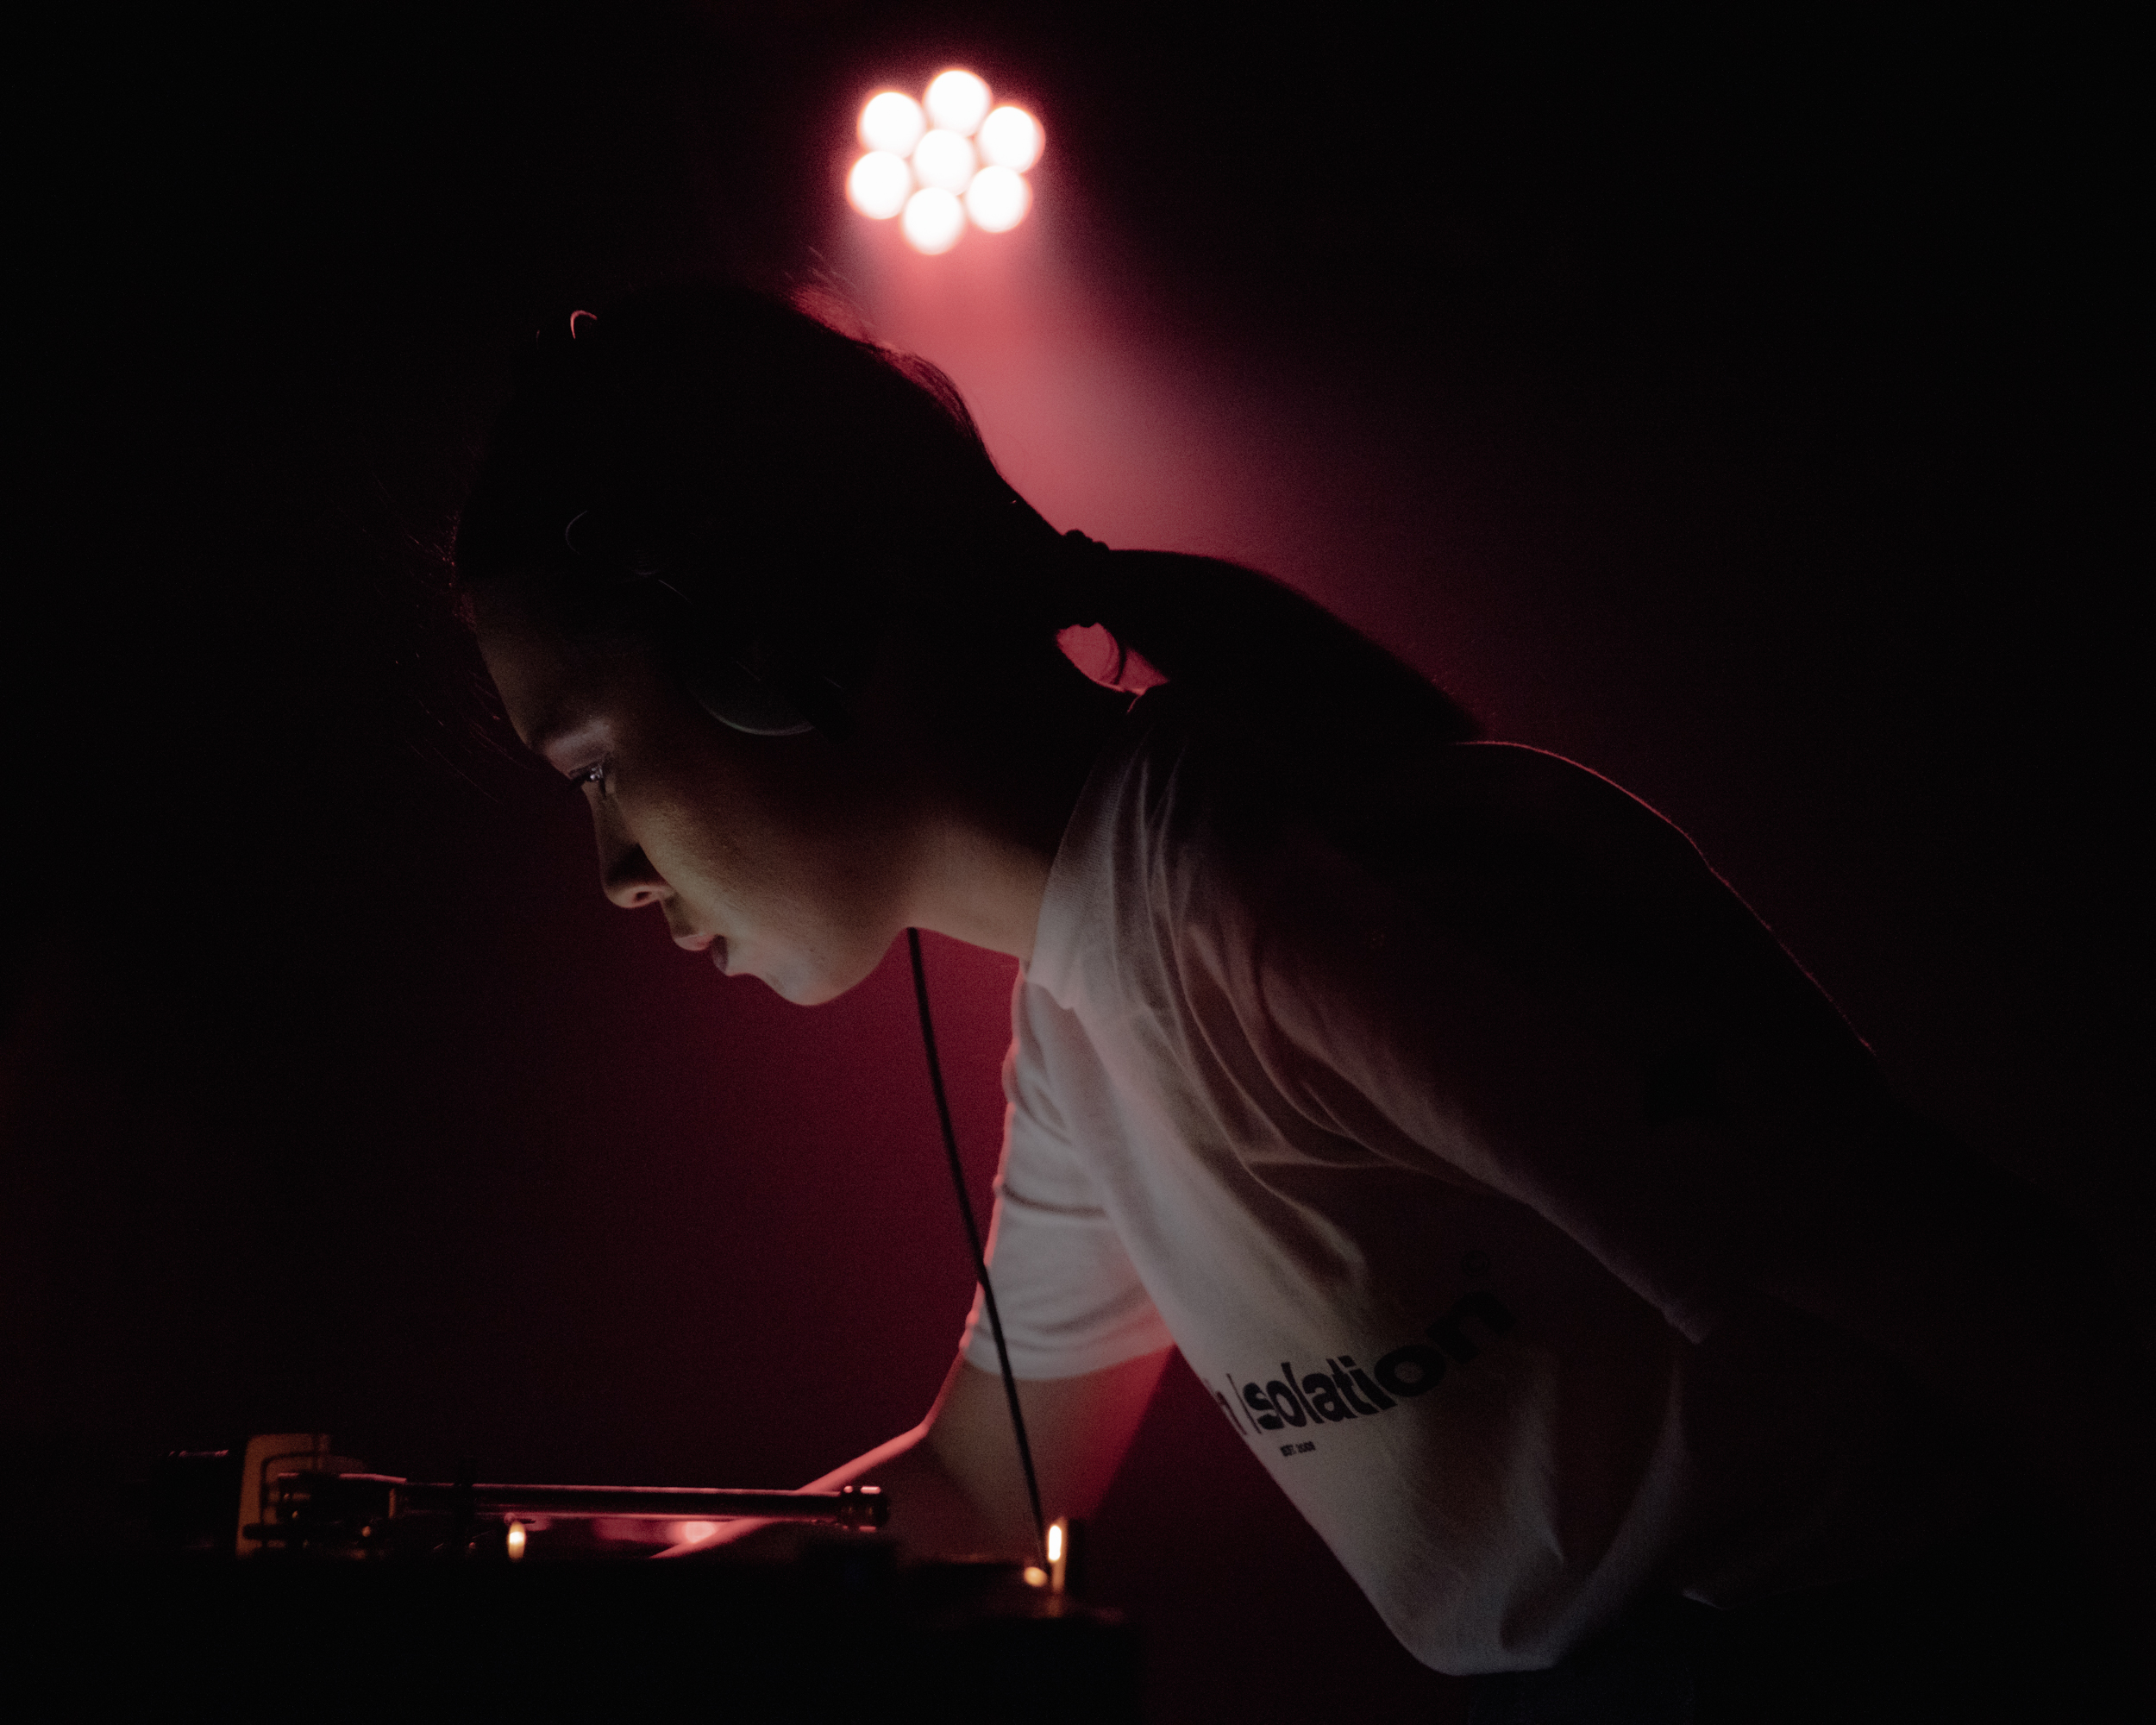 Portrait of a woman looking away, at a DJ table performing a set. She is wearing a white tshirt and has her hair in a ponytail